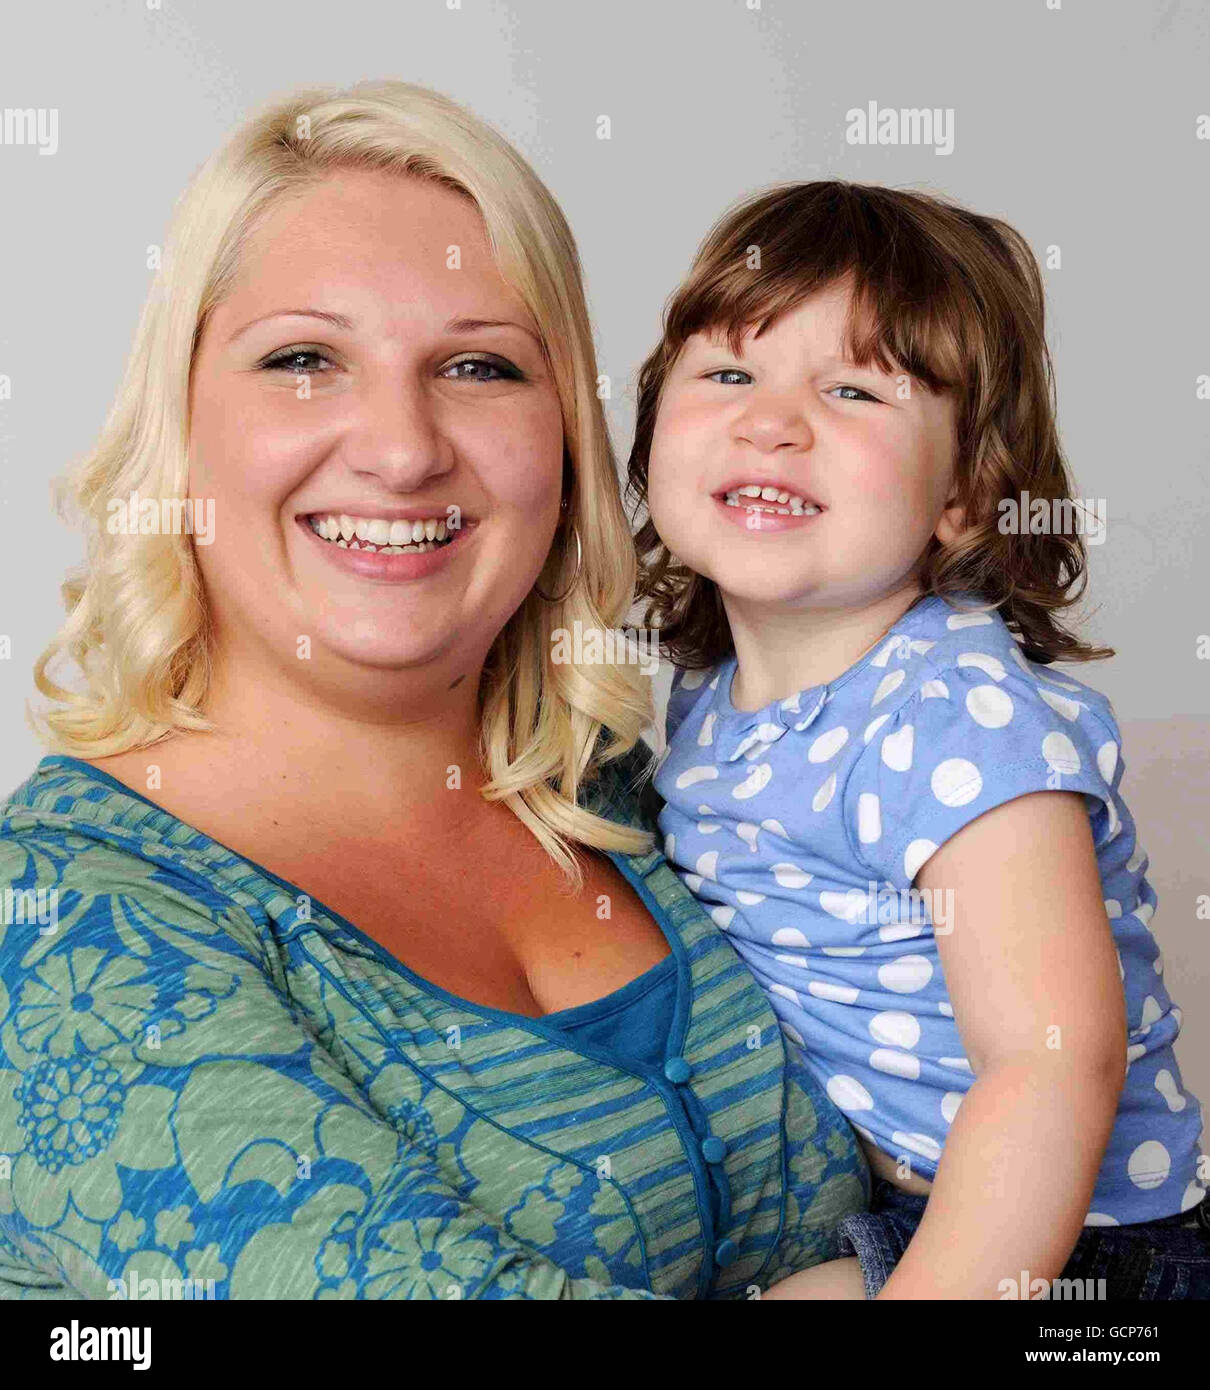 Amy Callaghan with two-year-old daughter Tegan. The 28-year-old from Rugby has received 30,000 compensation after surgeons left a swab inside her body when she had a Caesarean section, lawyers said today. Stock Photo